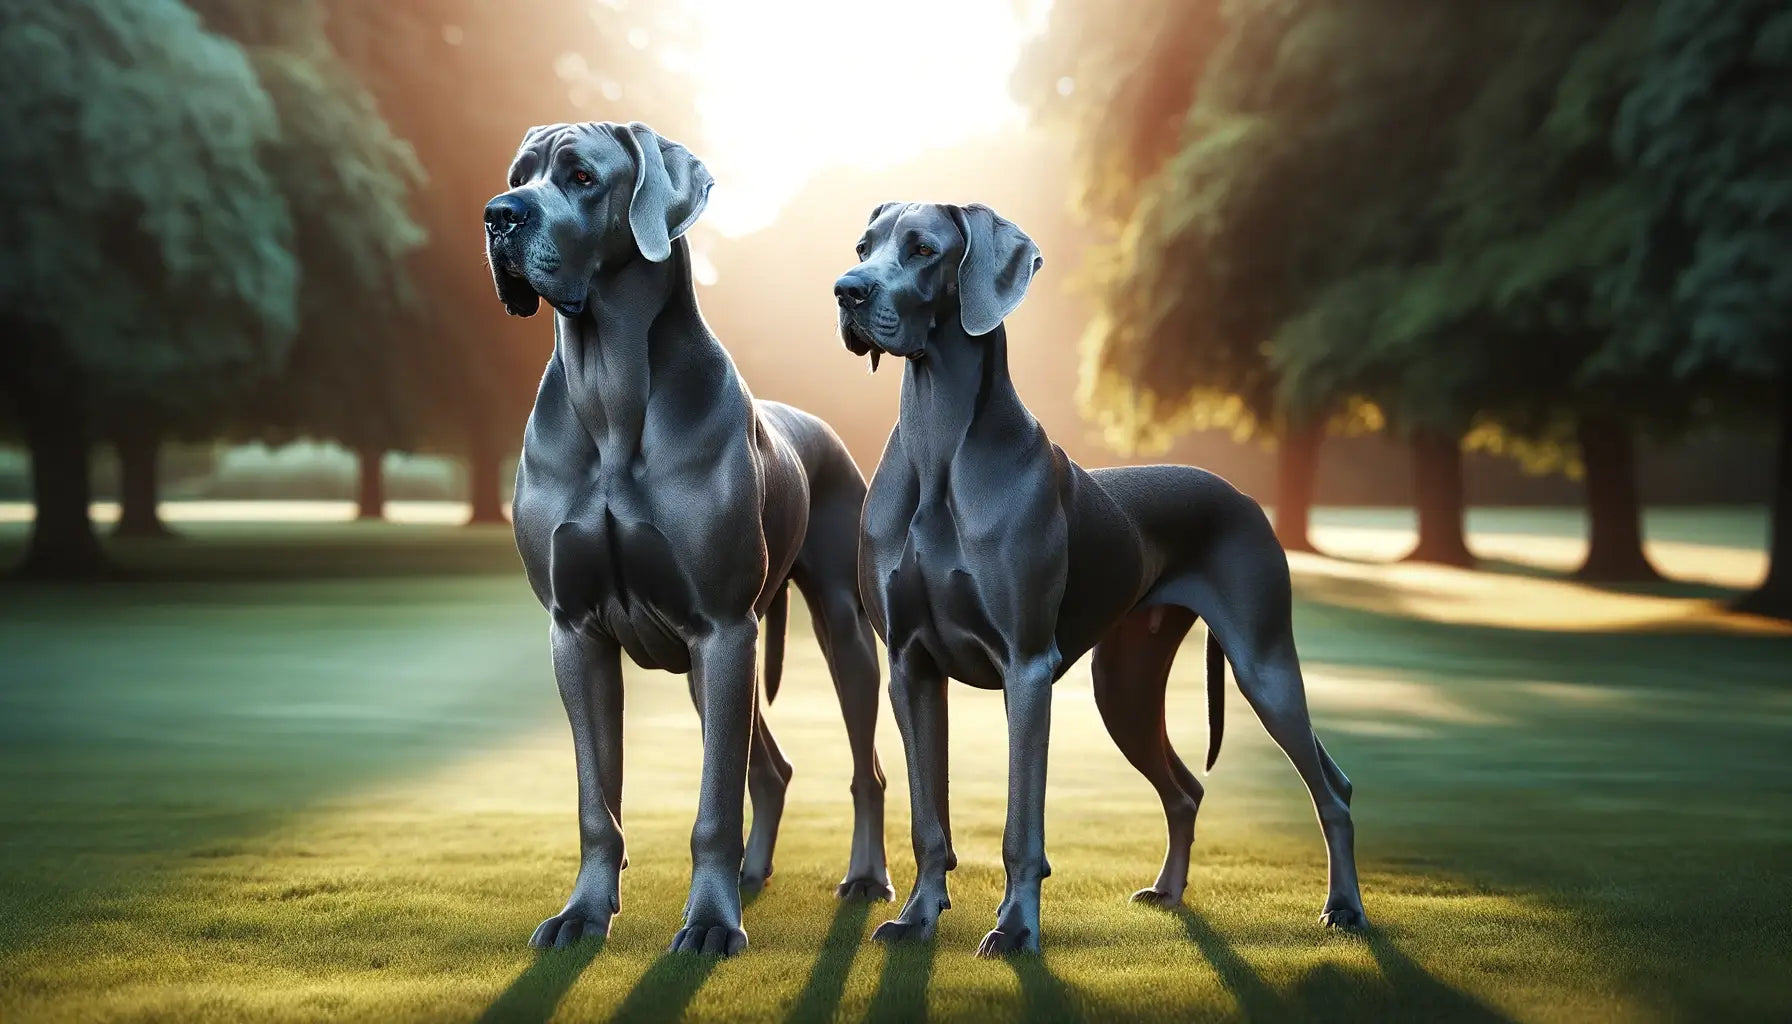 Blue Great Danes male and female with the male showing a slightly larger and broader build and the female appearing more slender.